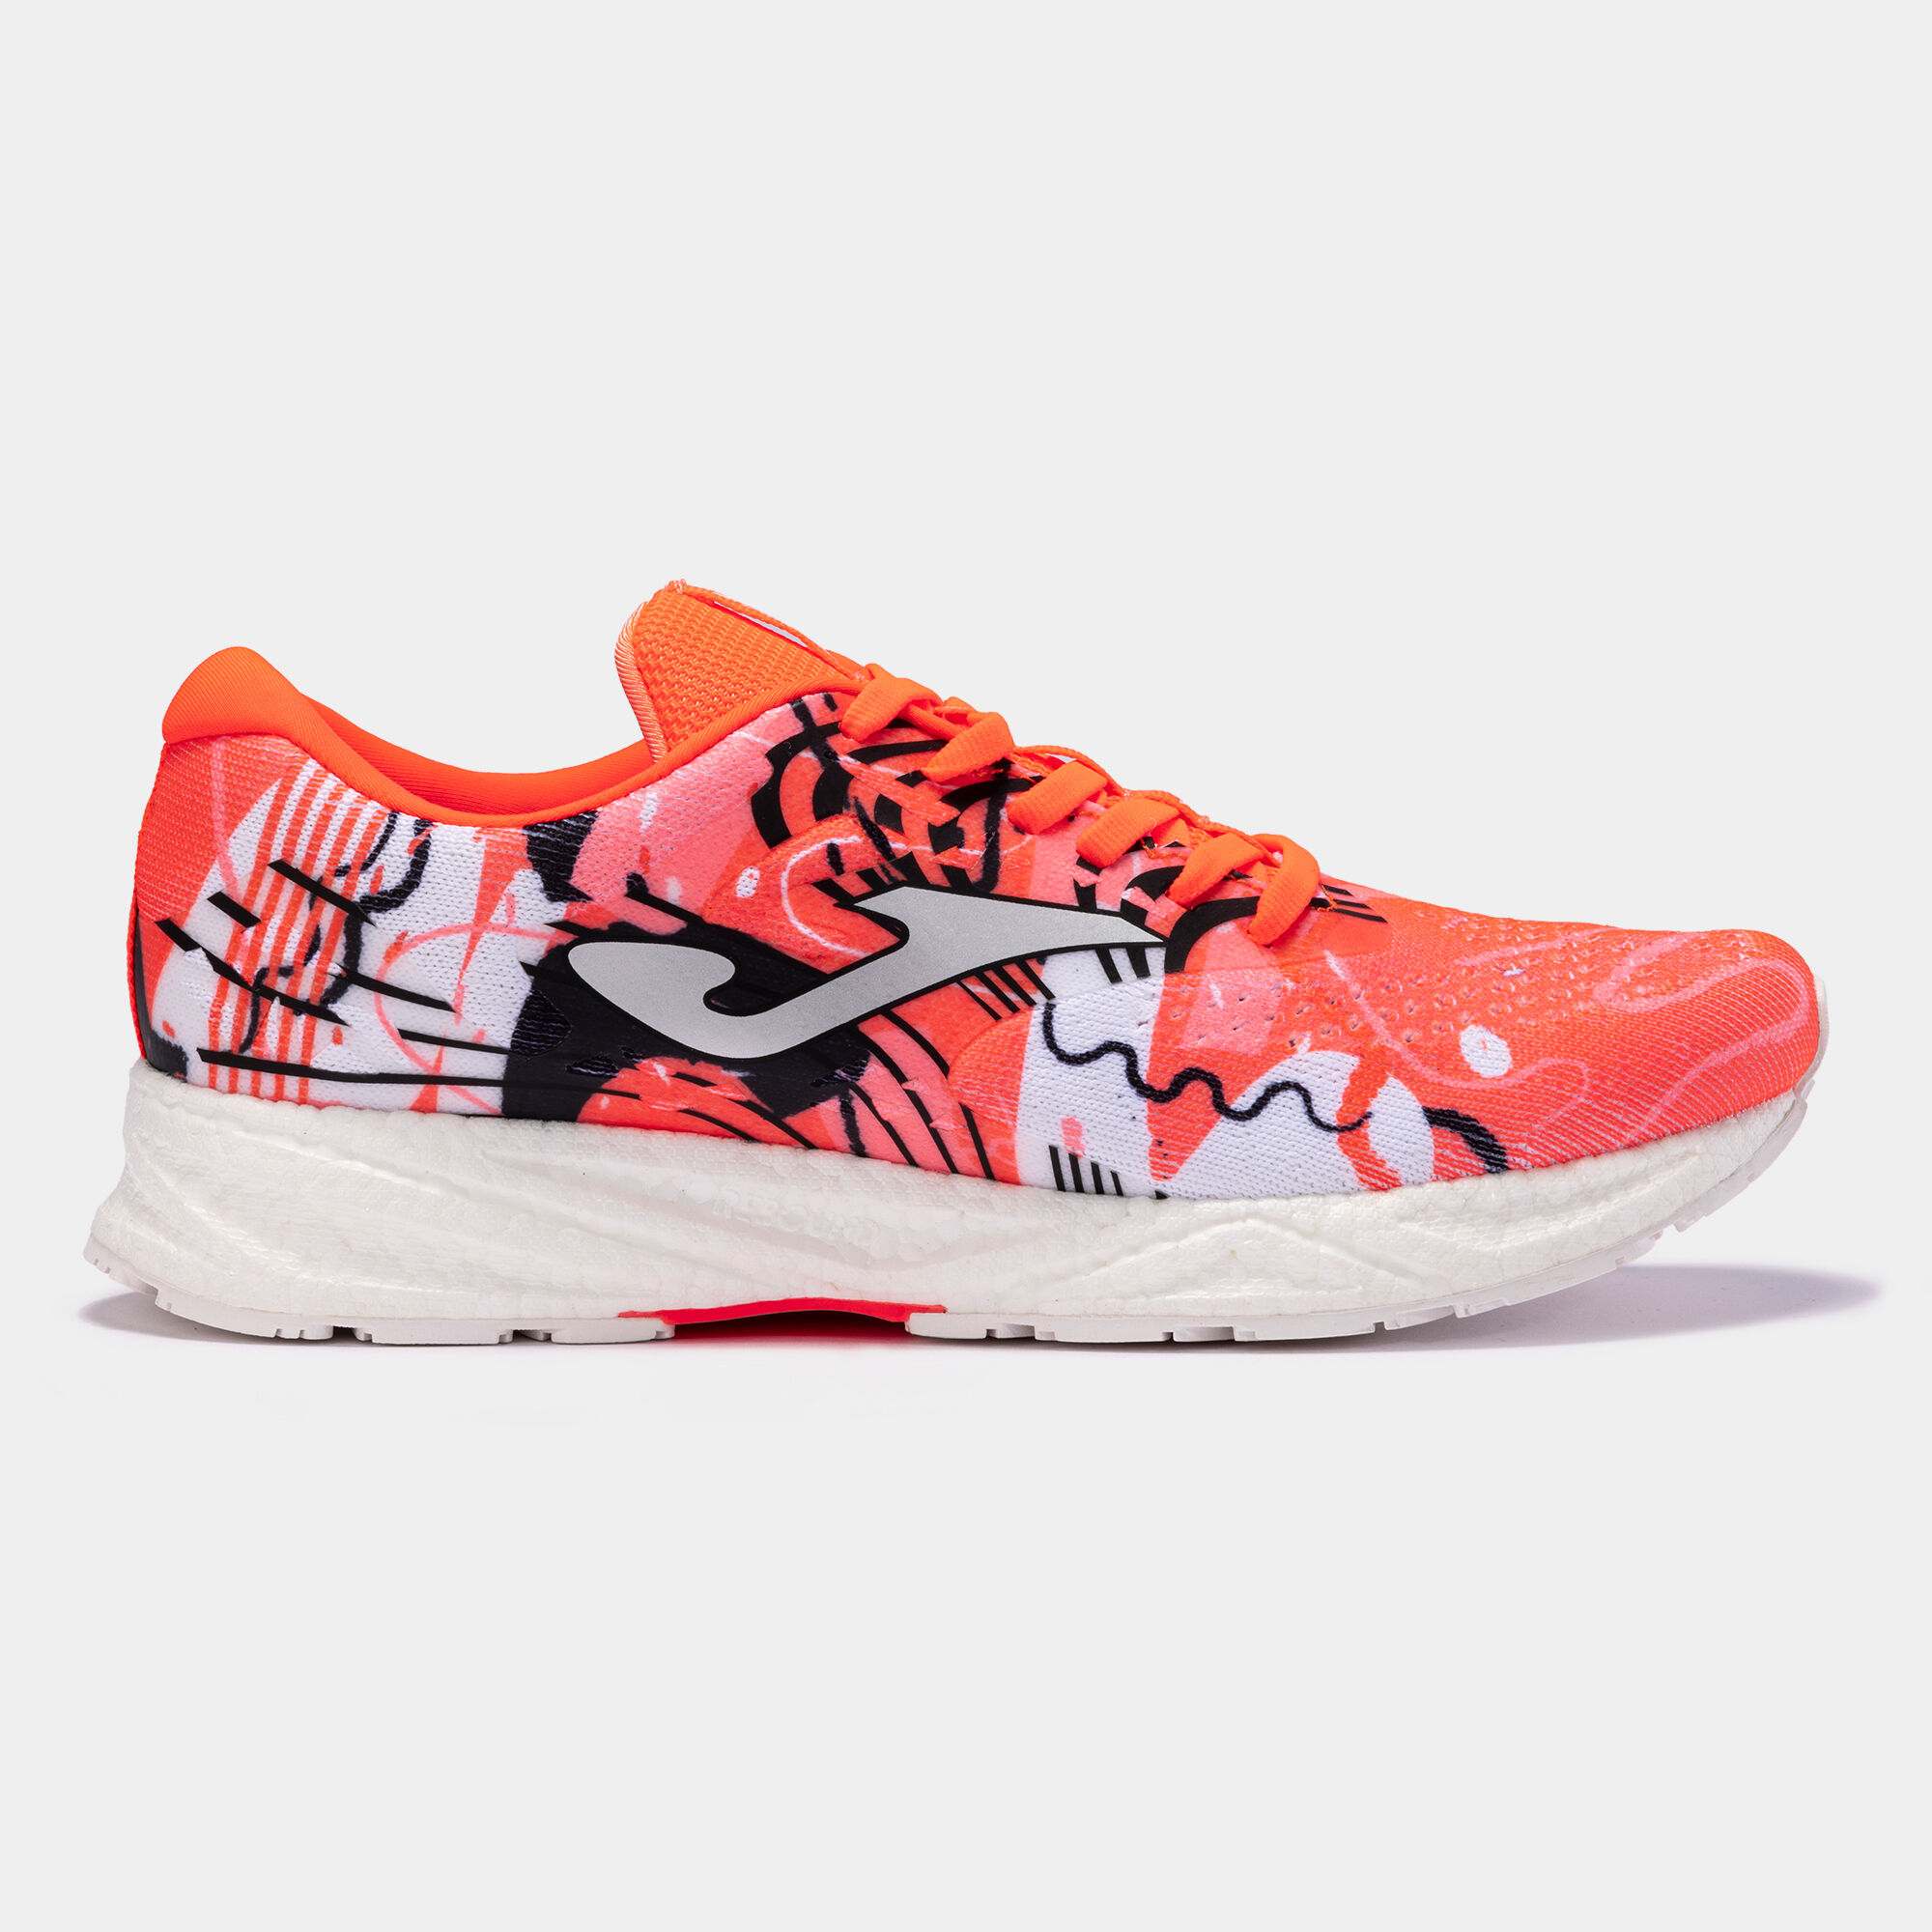 Chaussures running R.Viper Lady 23 femme corail